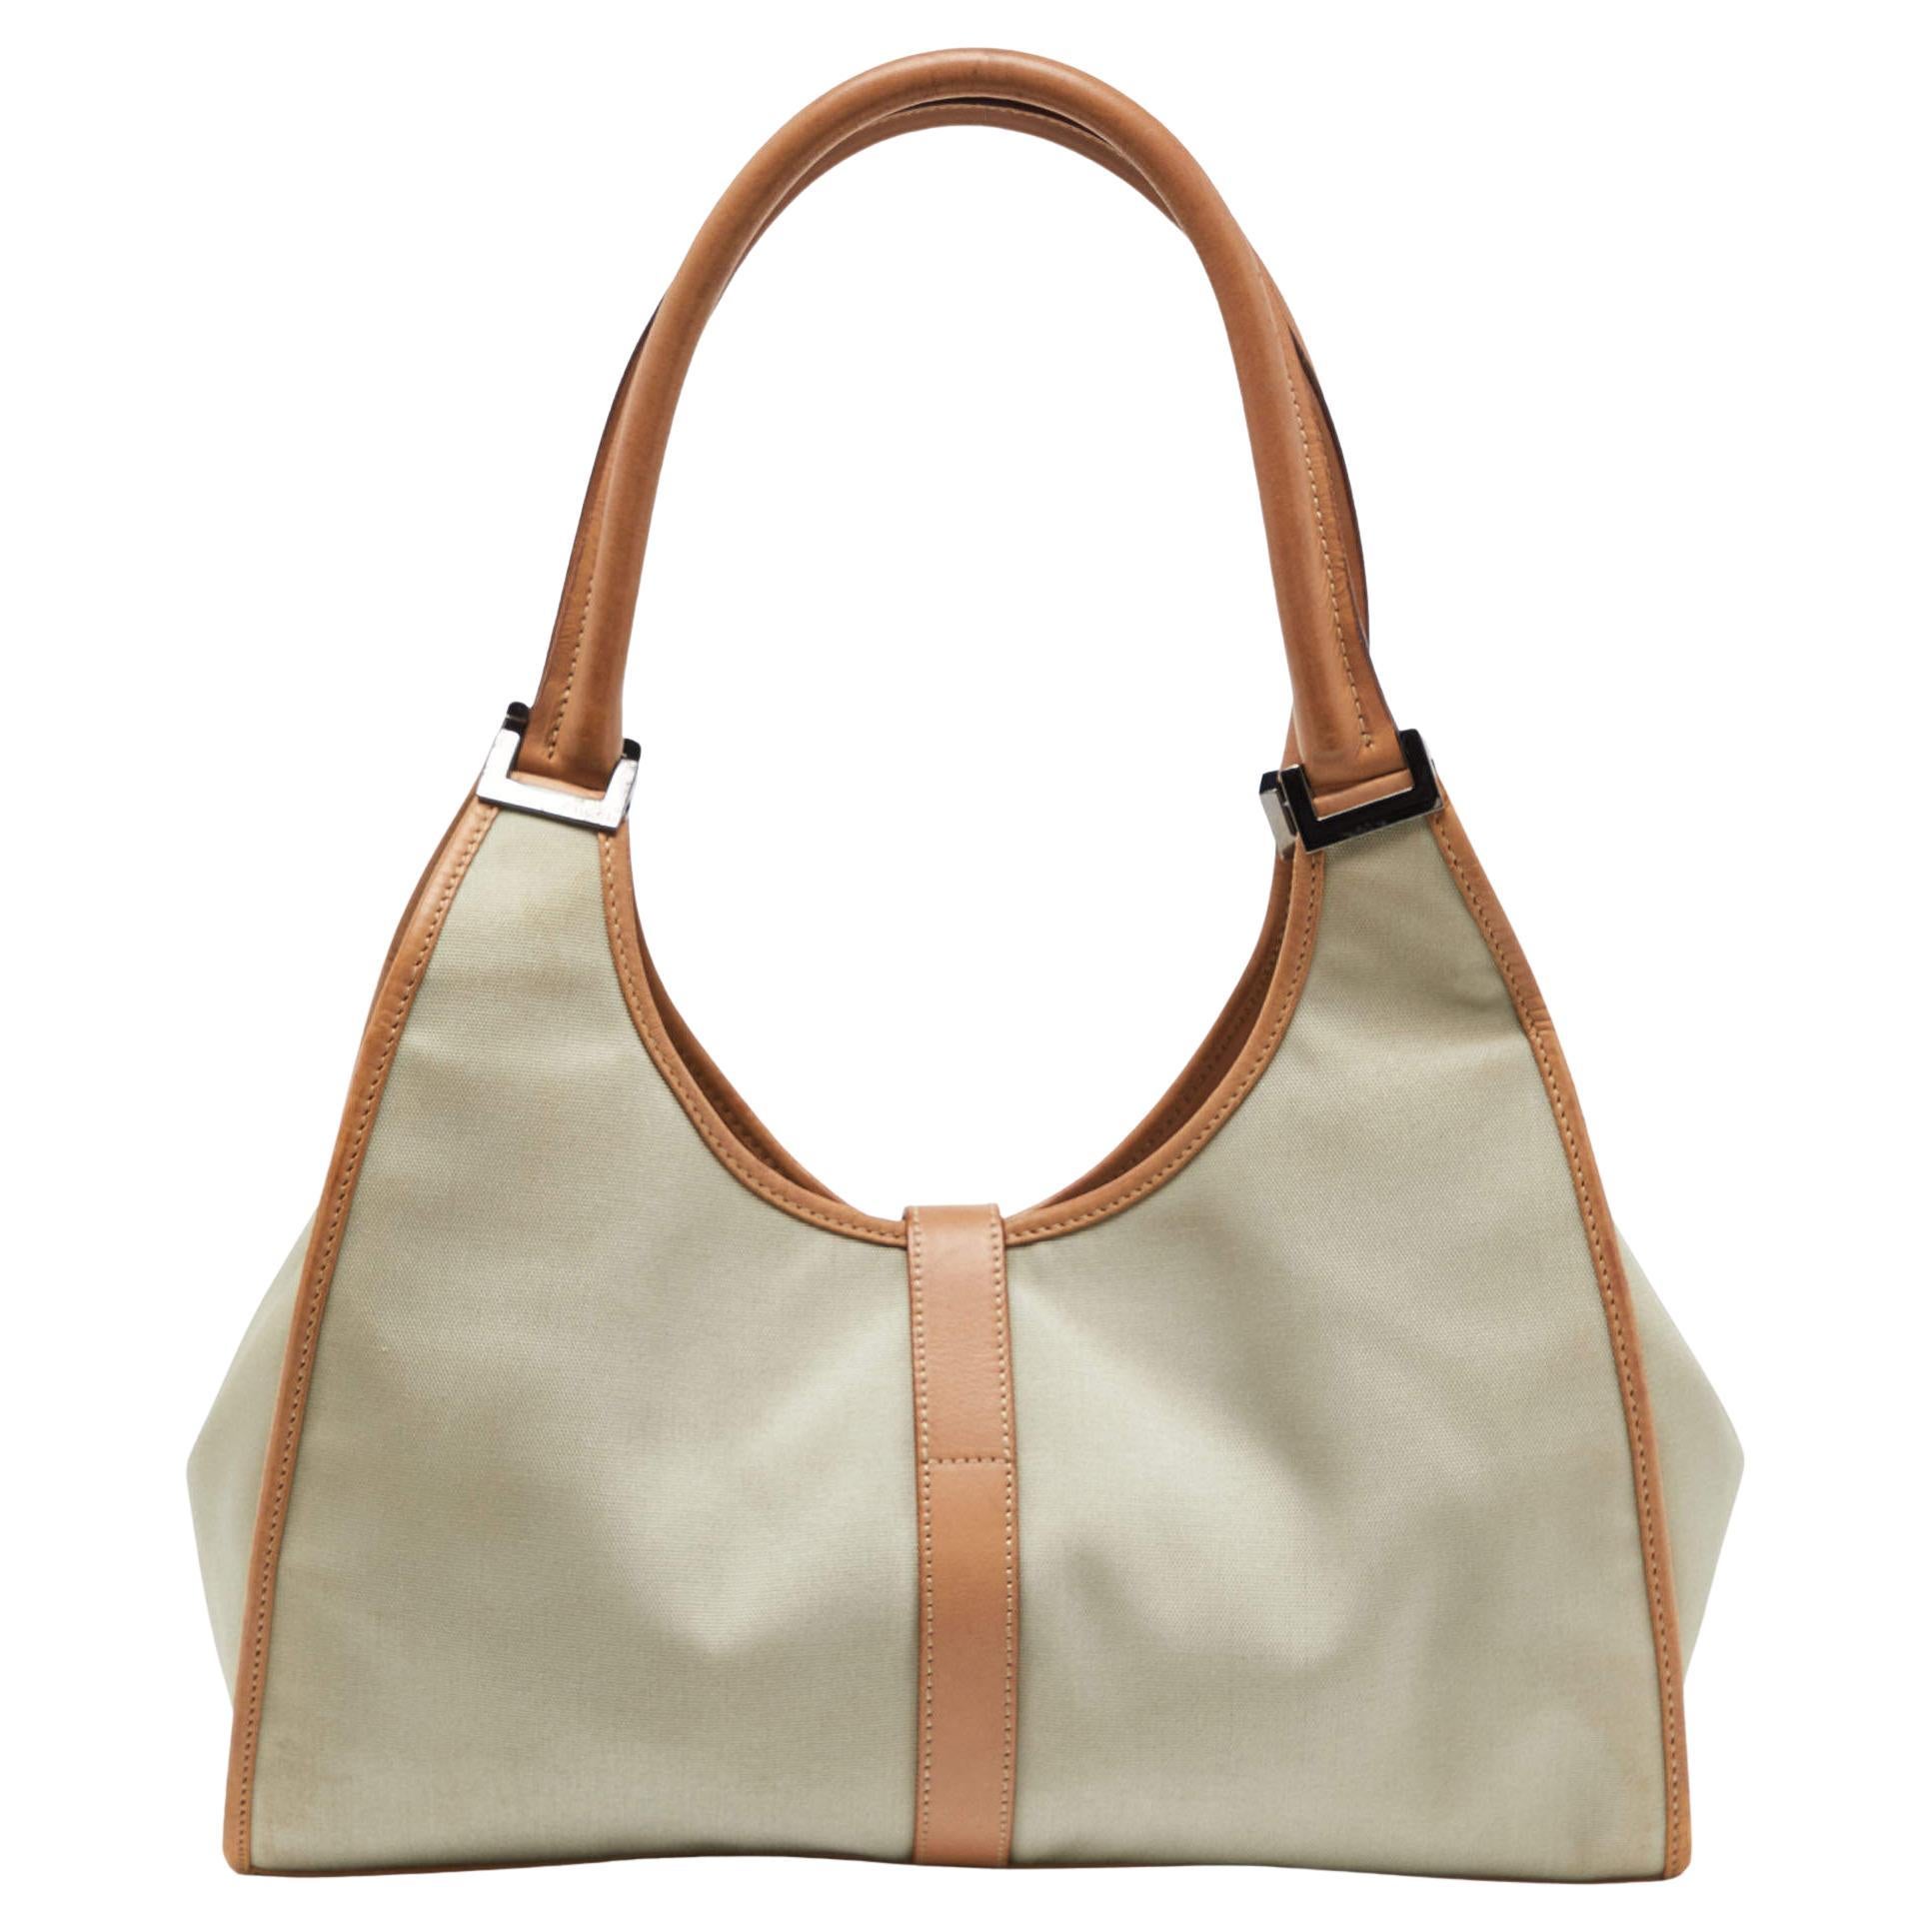 Gucci Beige/Tan Canvas and Leather Jackie Tote